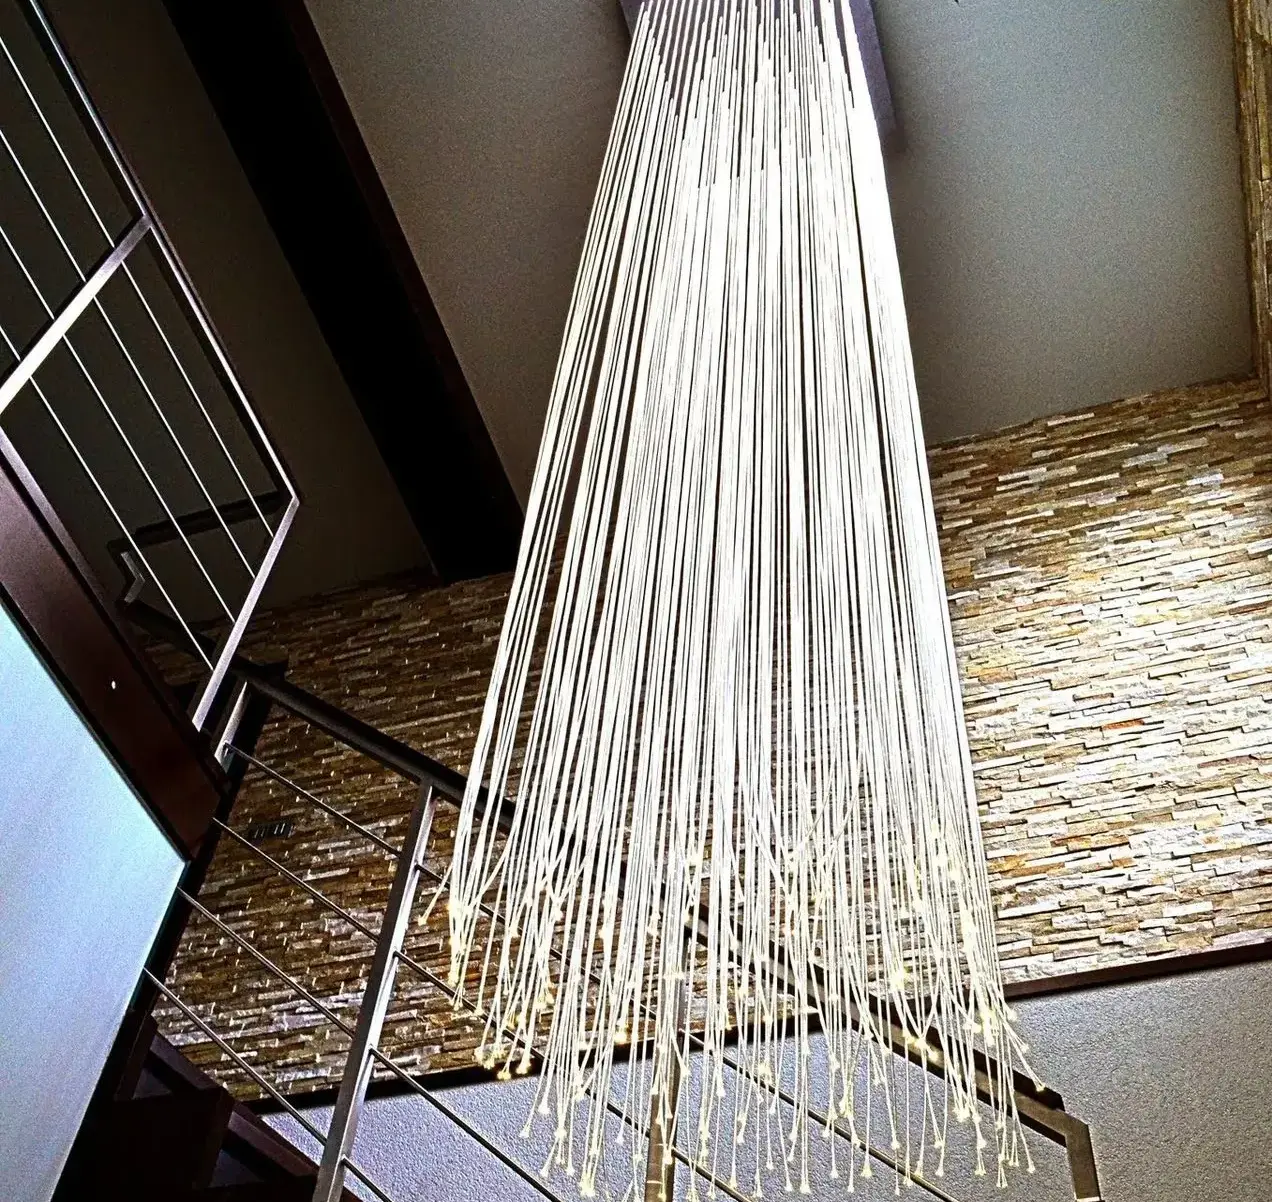 Luxury modern fibre optic chandelier in private house on staircase